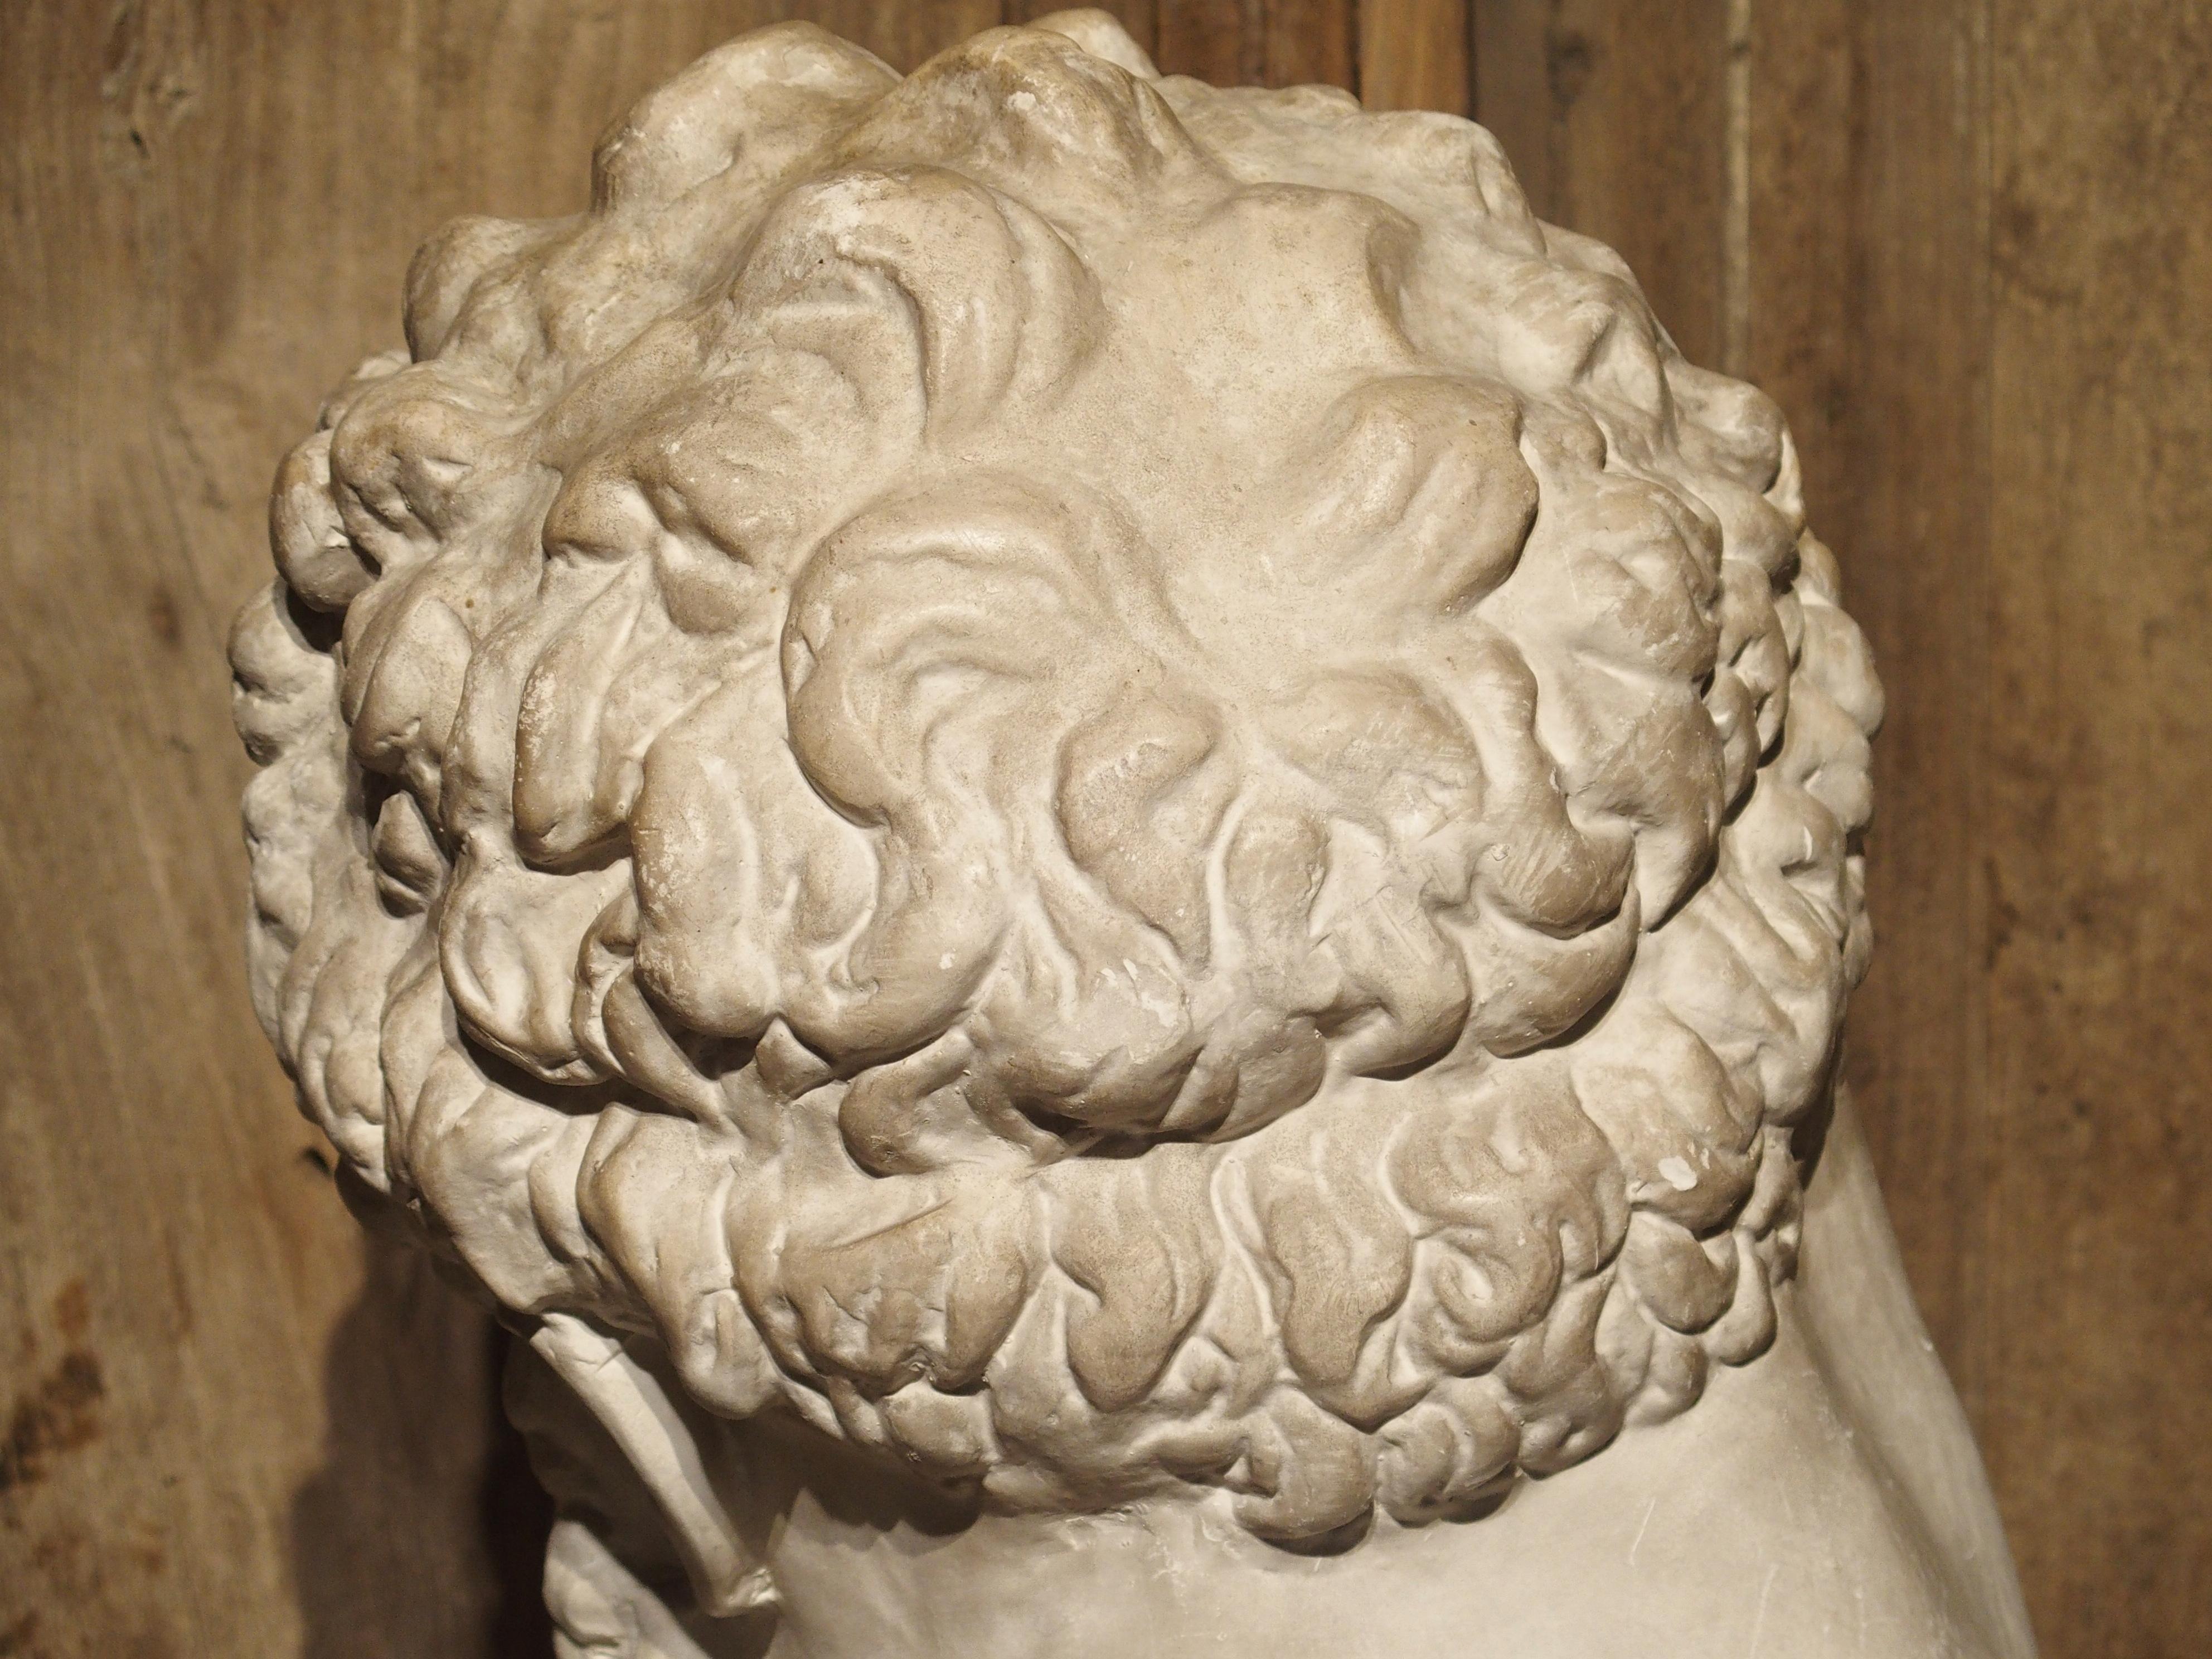 From Italy, this classical plaster bust has been beautifully sculpted. Busts like this were often done as a study of those from antiquity. The color of the material closely resembles that of Carrara or Italian statuary marble. The bearded man has